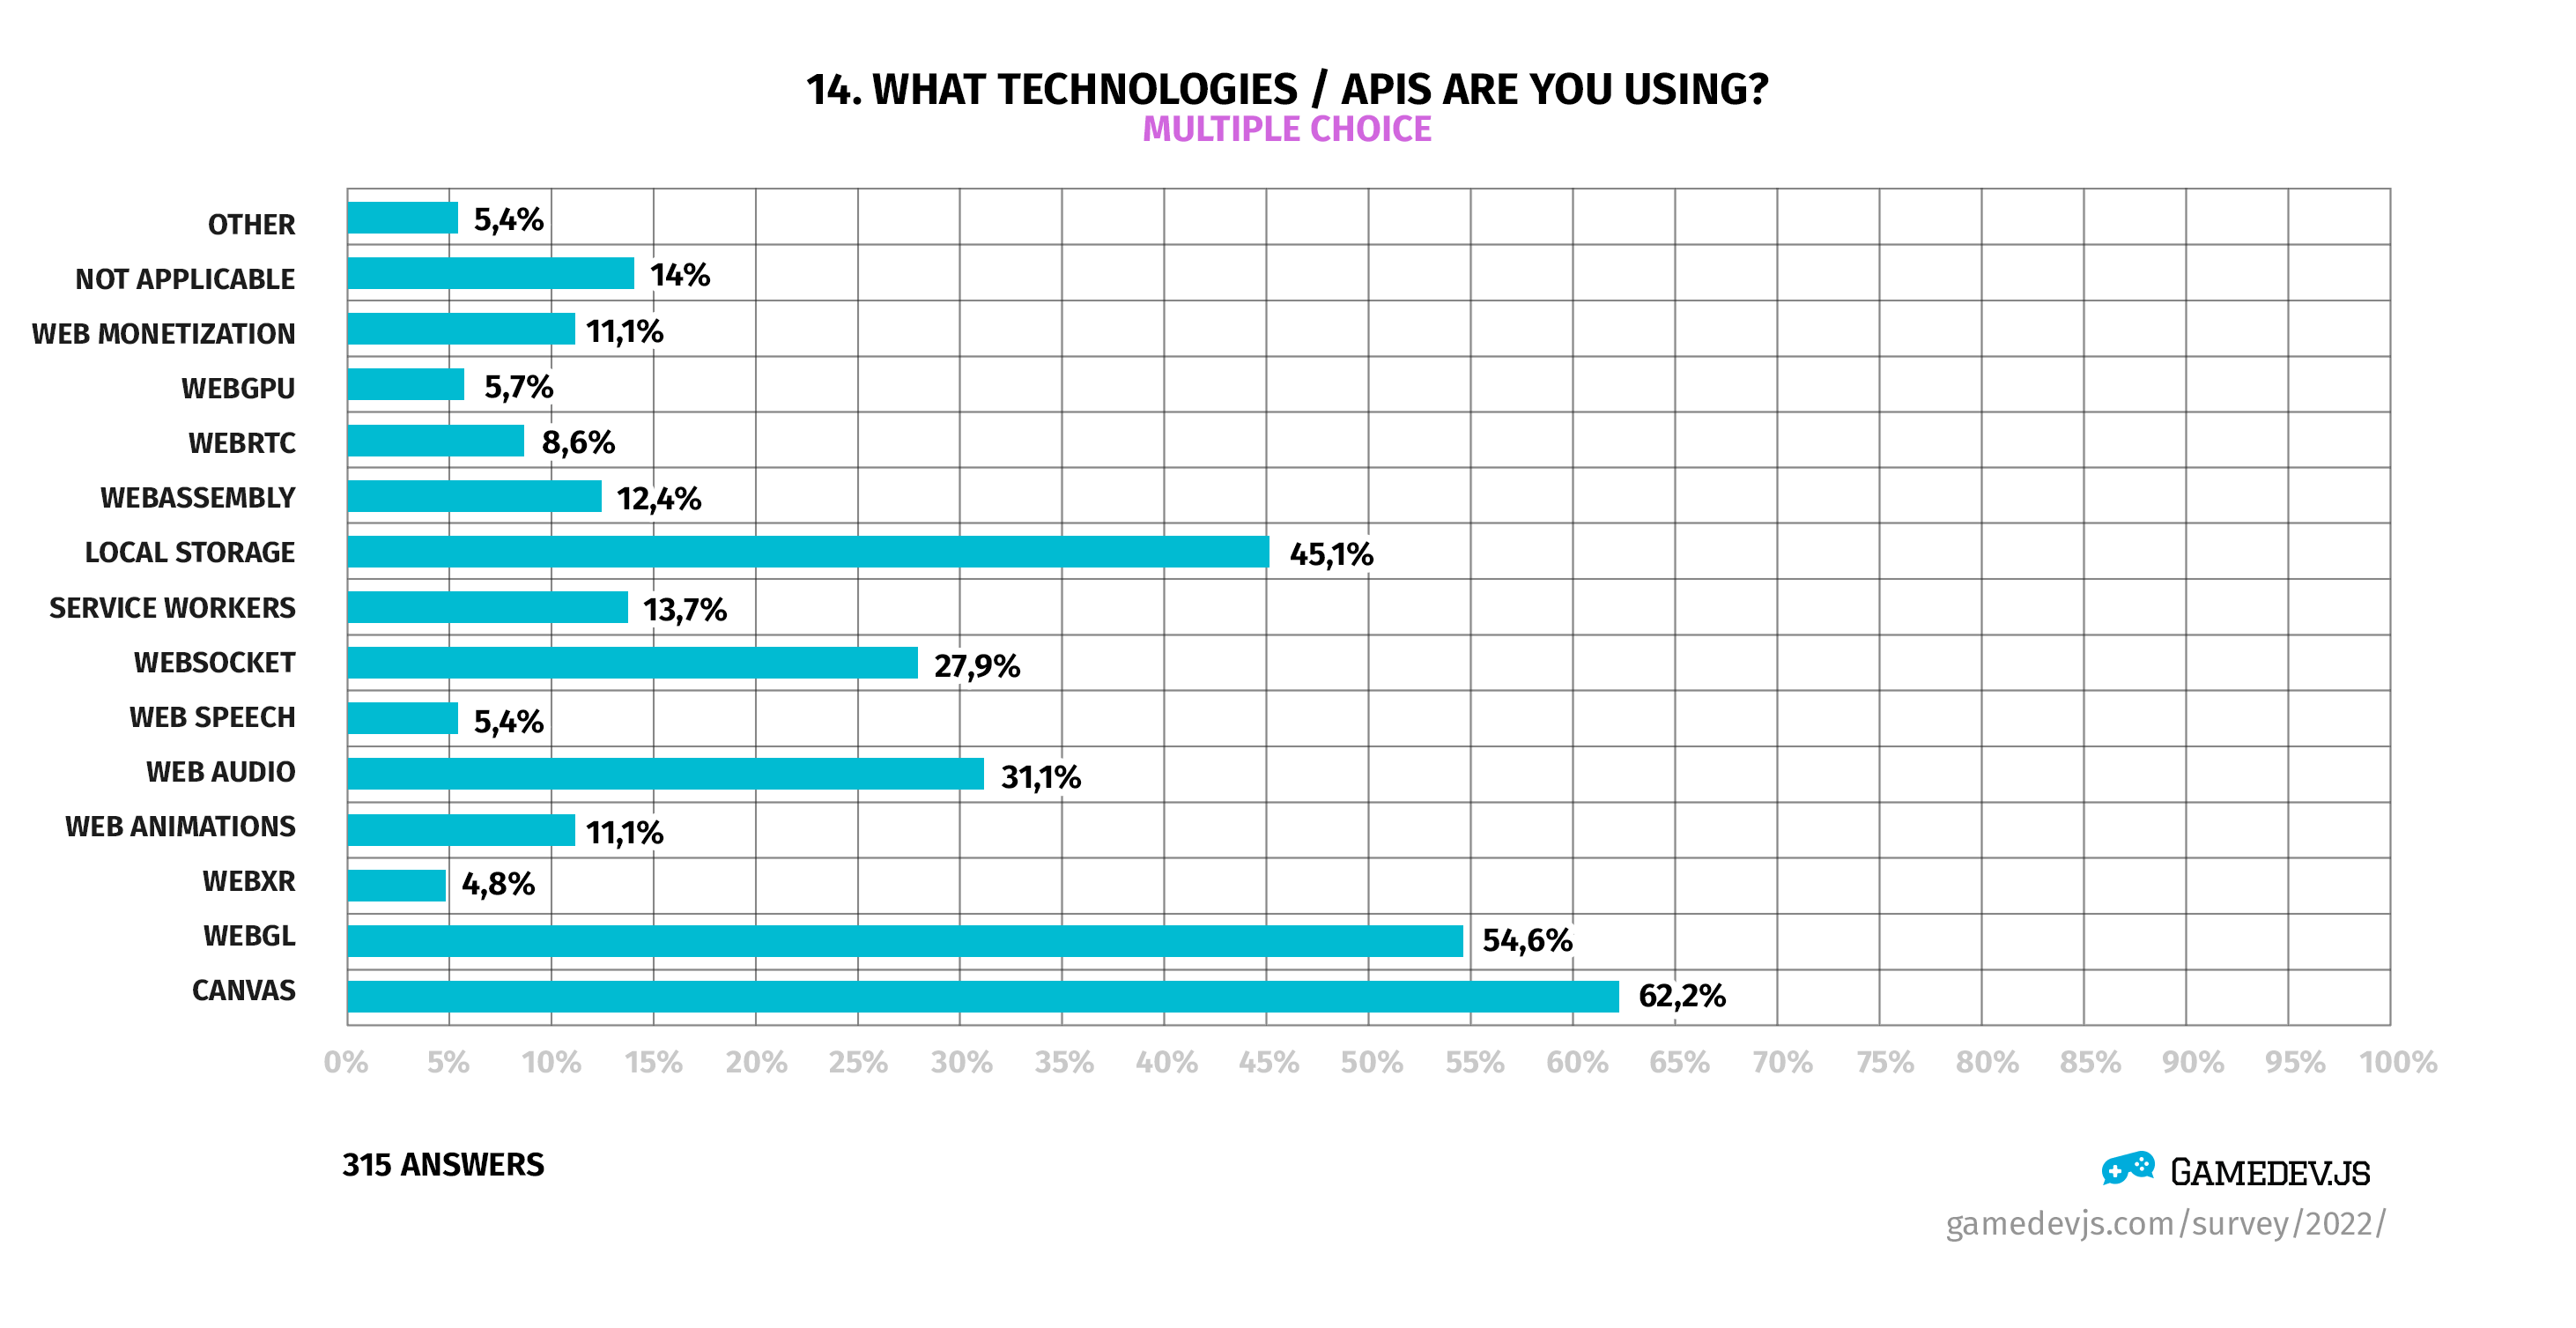 Gamedev.js Survey 2022 - Question #14: What technologies / APIs are you using?